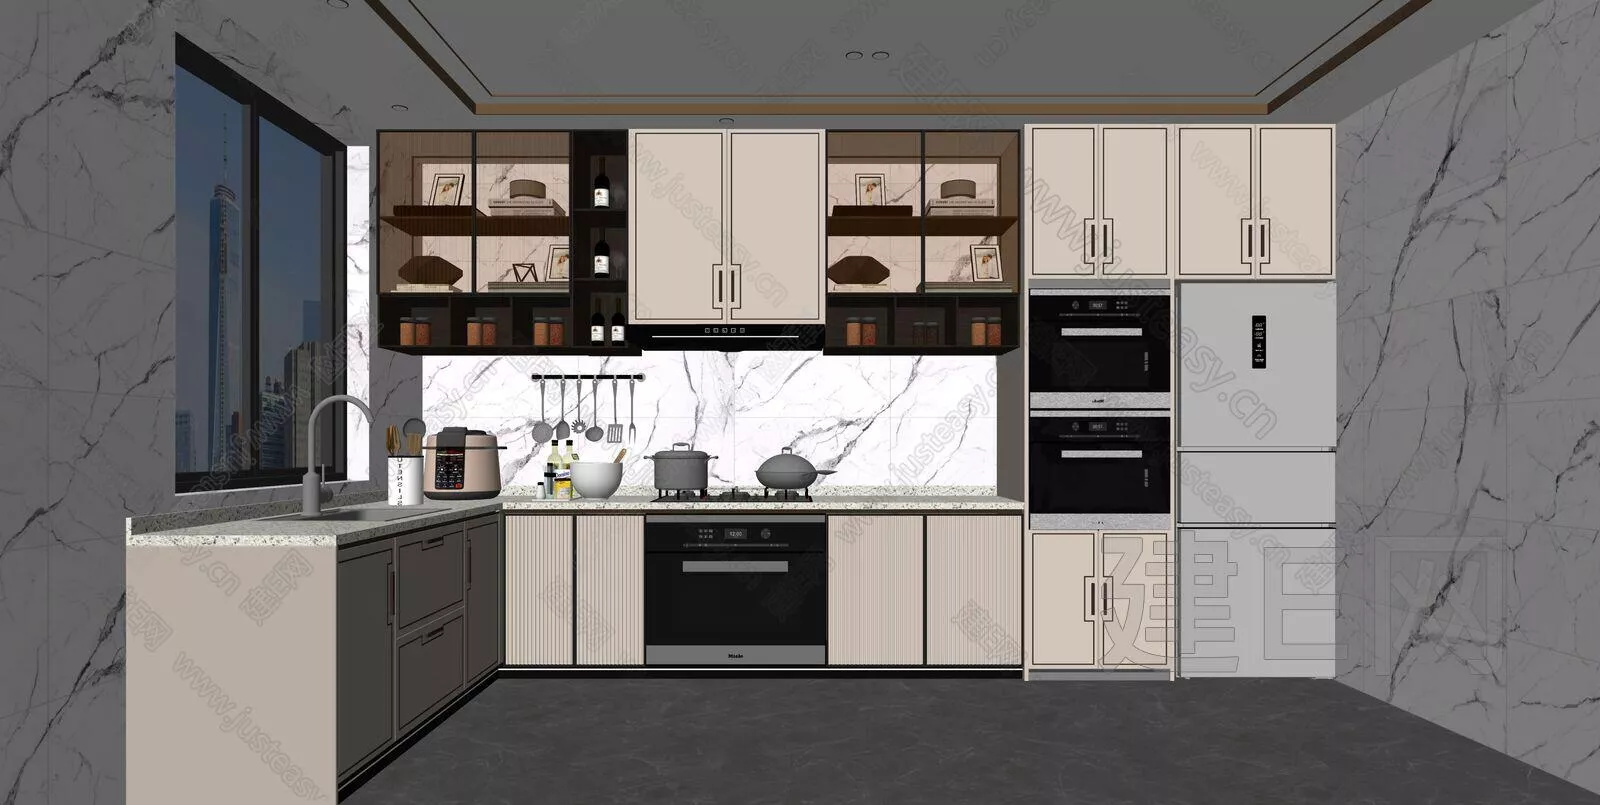 CHINESE KITCHEN - SKETCHUP 3D SCENE - ENSCAPE - 110577123